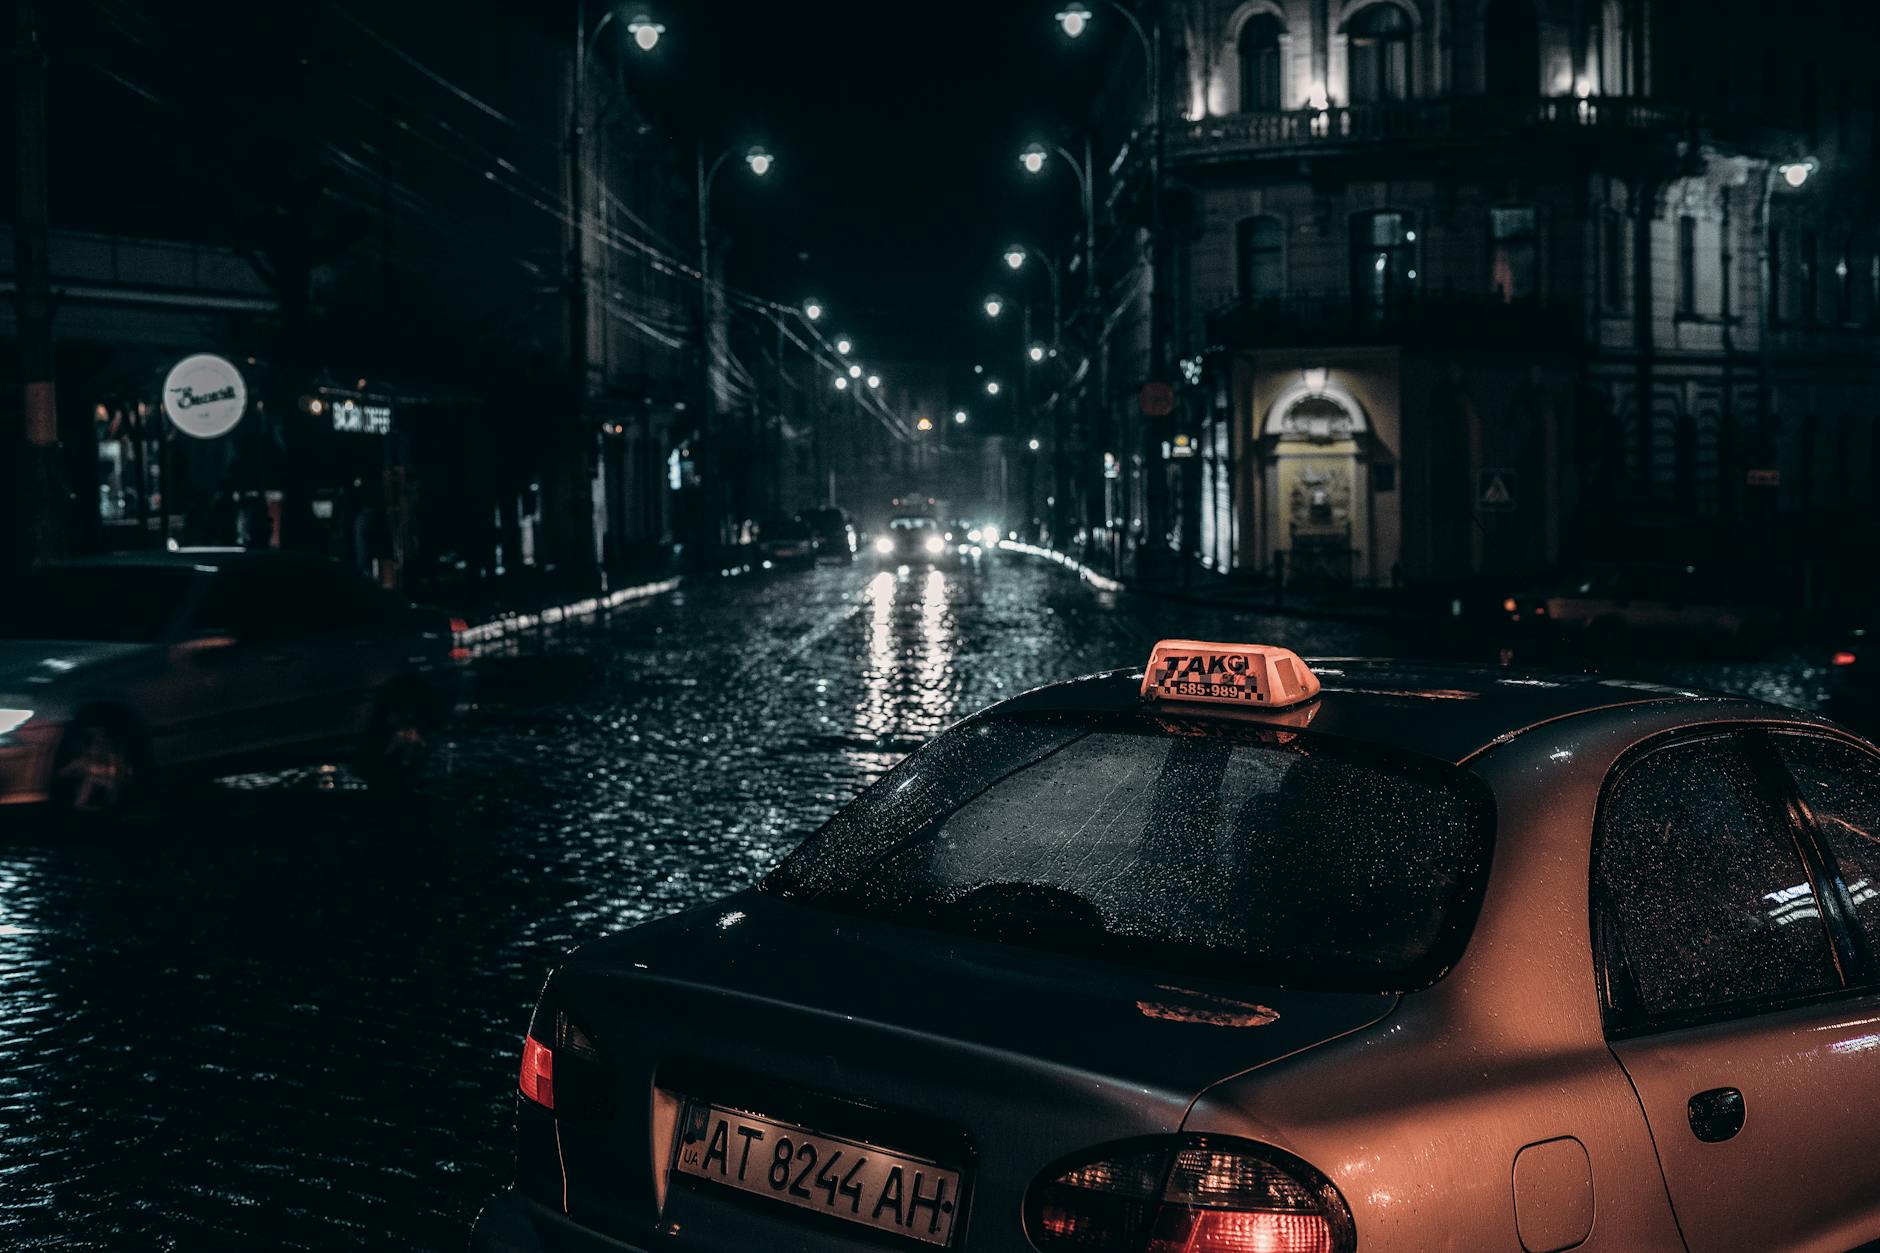 Taxi placed on street in rainy evening